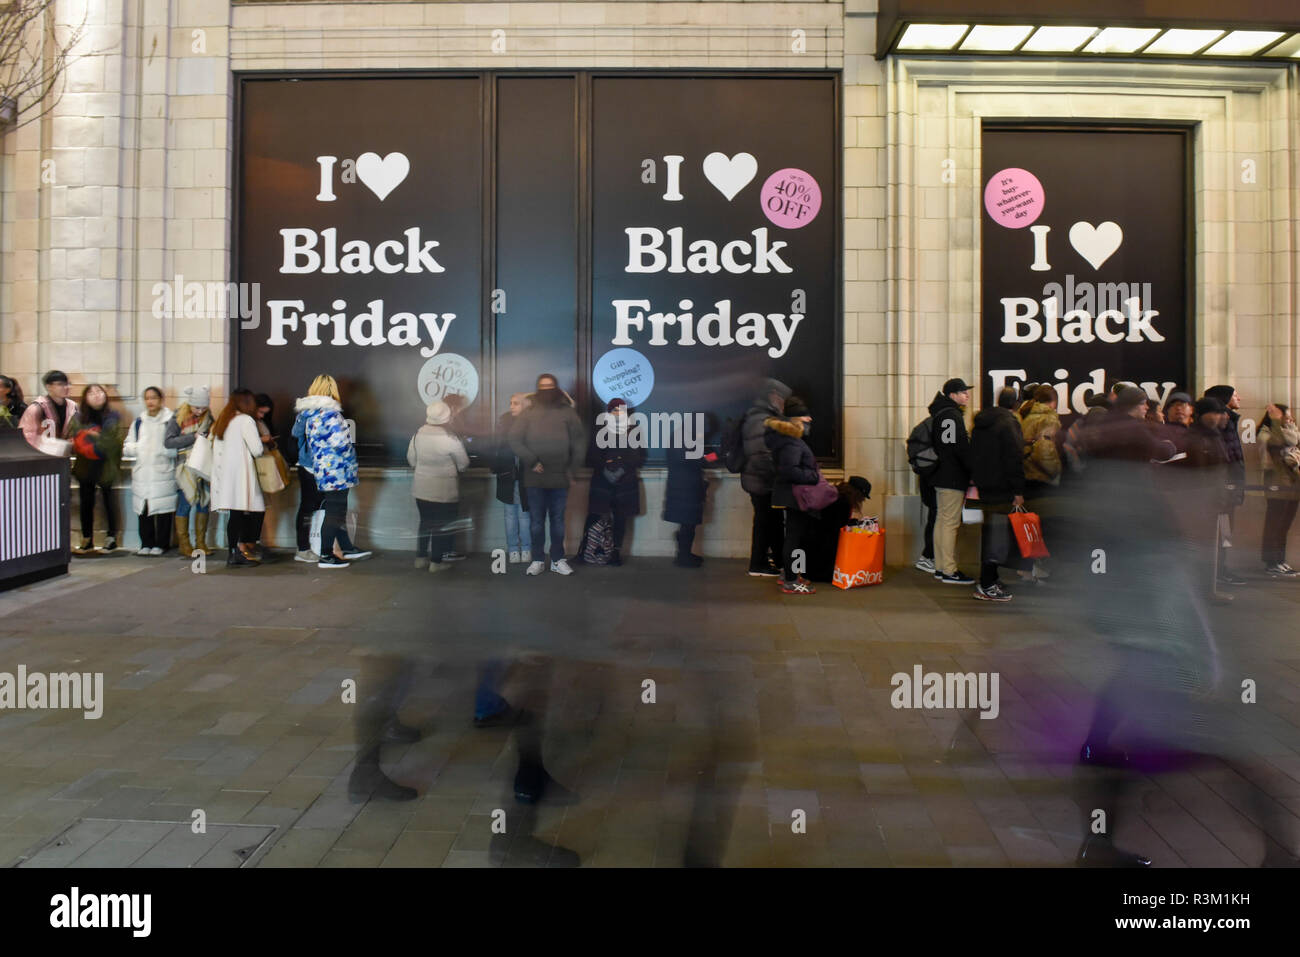 London, UK. 23 November 2018. People queue into the night in front of  advertising signs outside the UGG store near Piccadilly Circus on Black  Friday. Traditional retailers face increasing challenges to attract